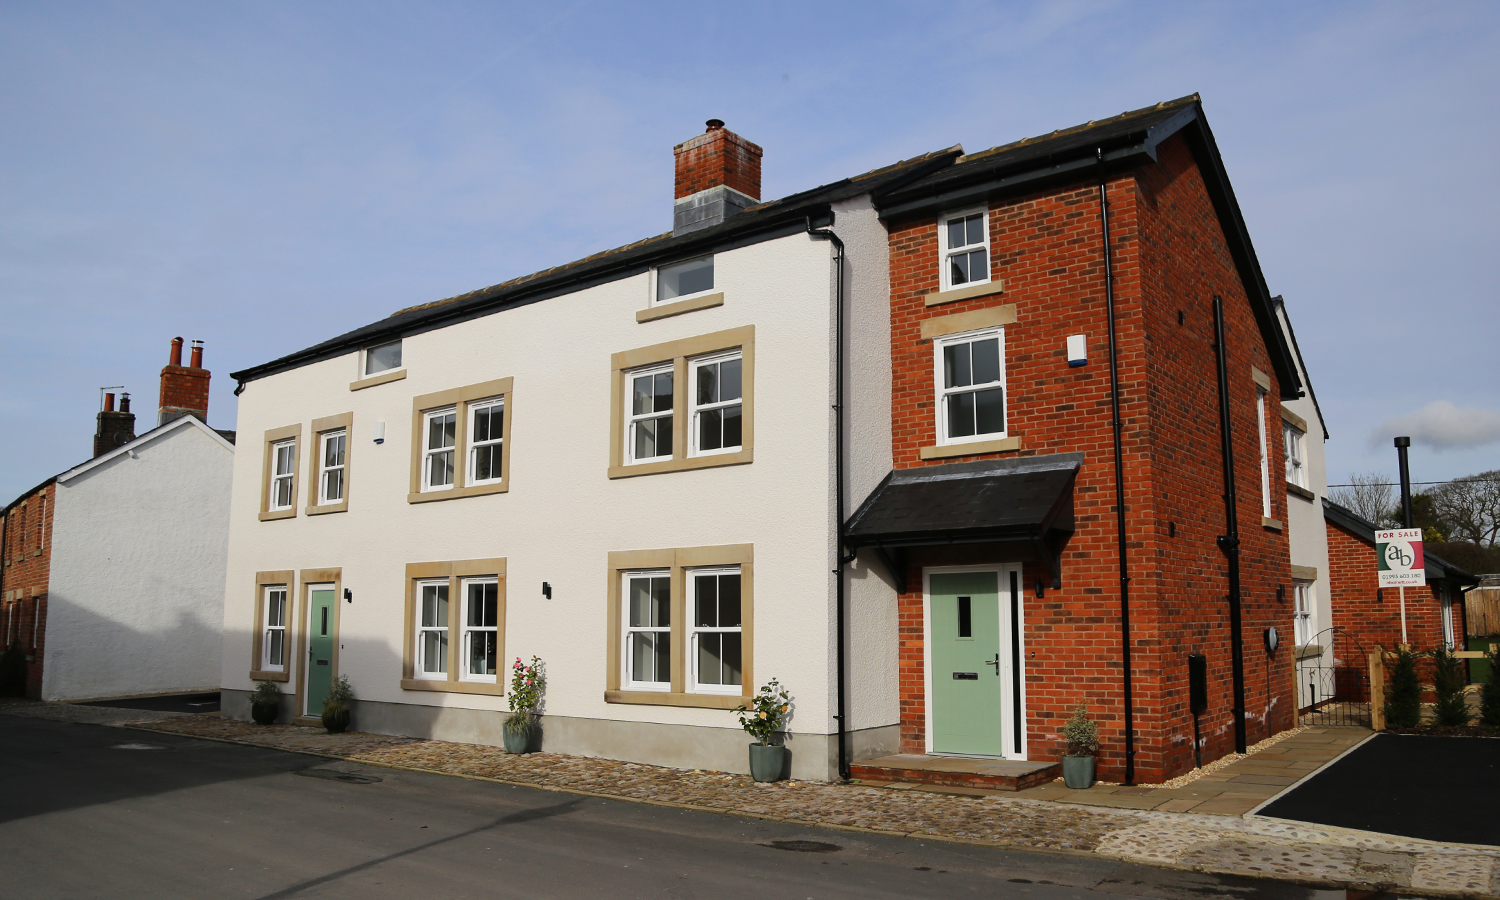 Brindle Homes Completed Development